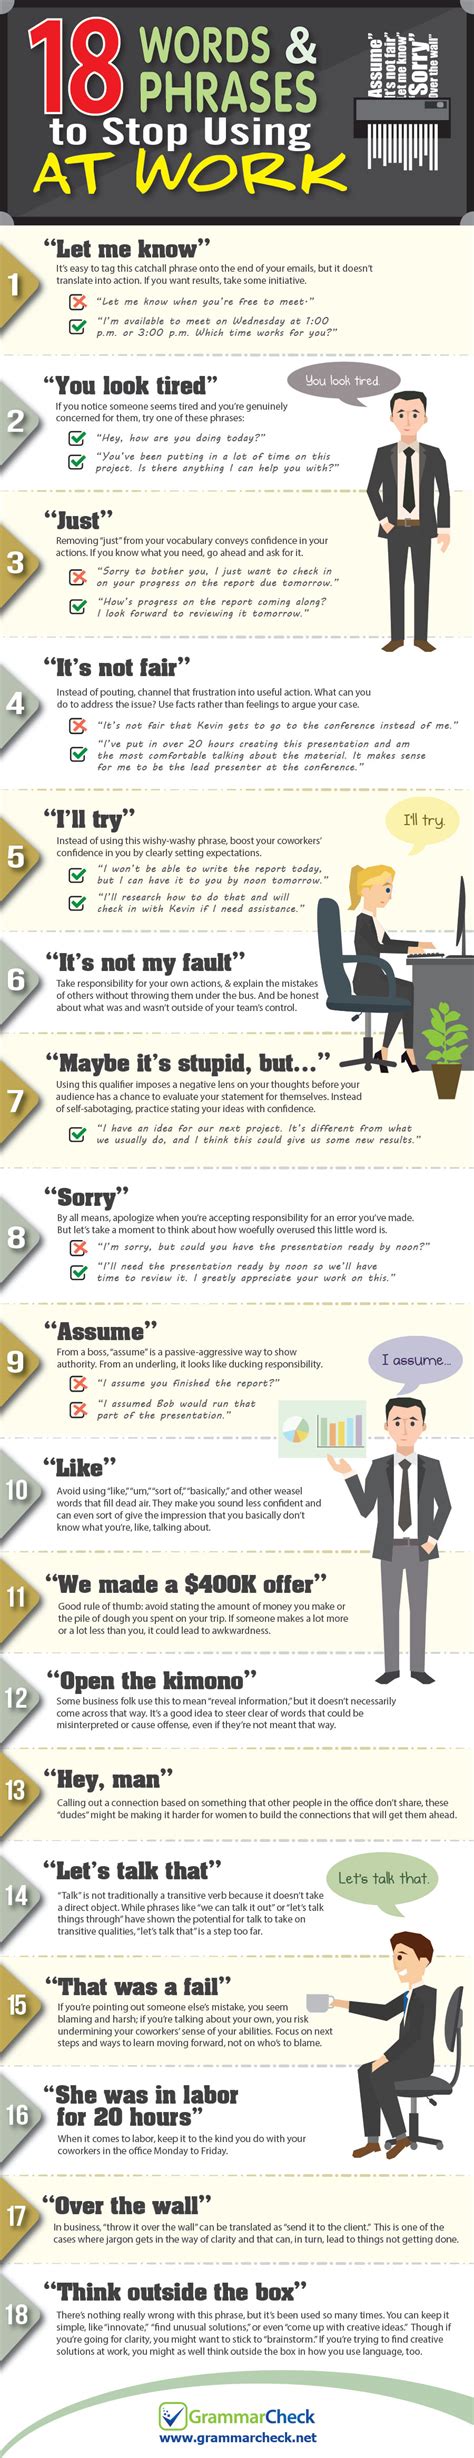 Stop Using These 18 Words And Phrases At Work Infographic